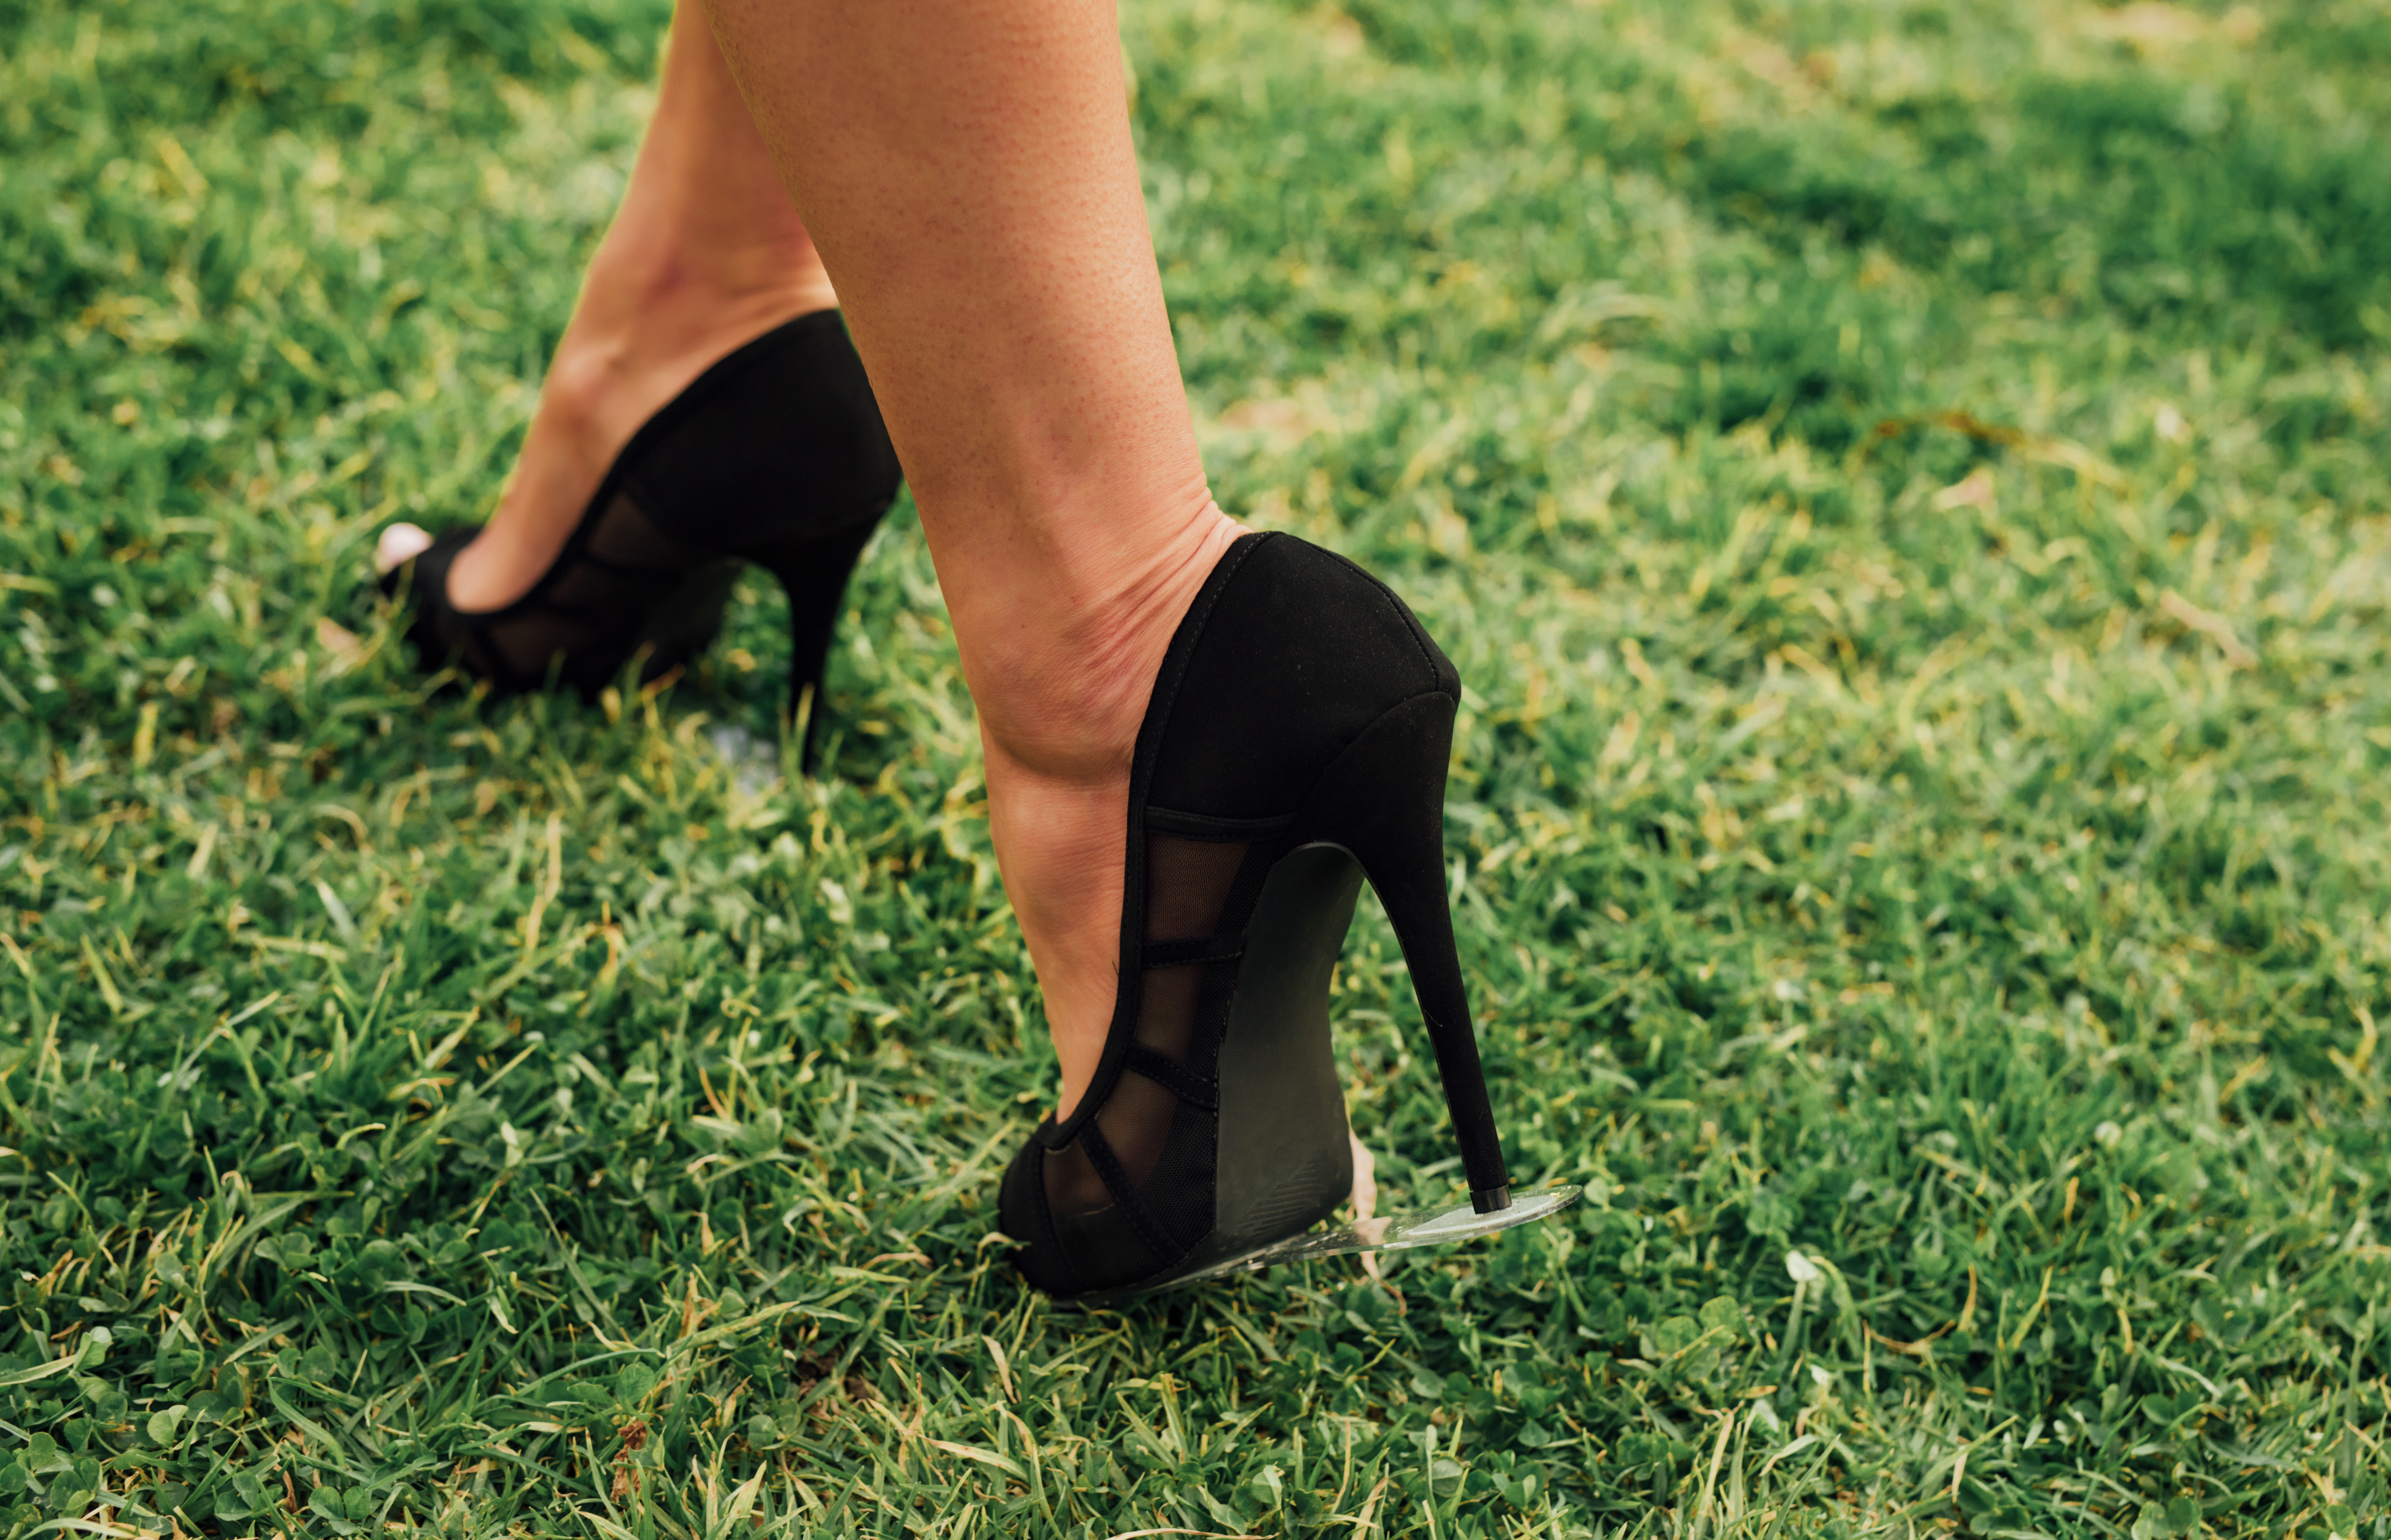 stiletto covers for grass